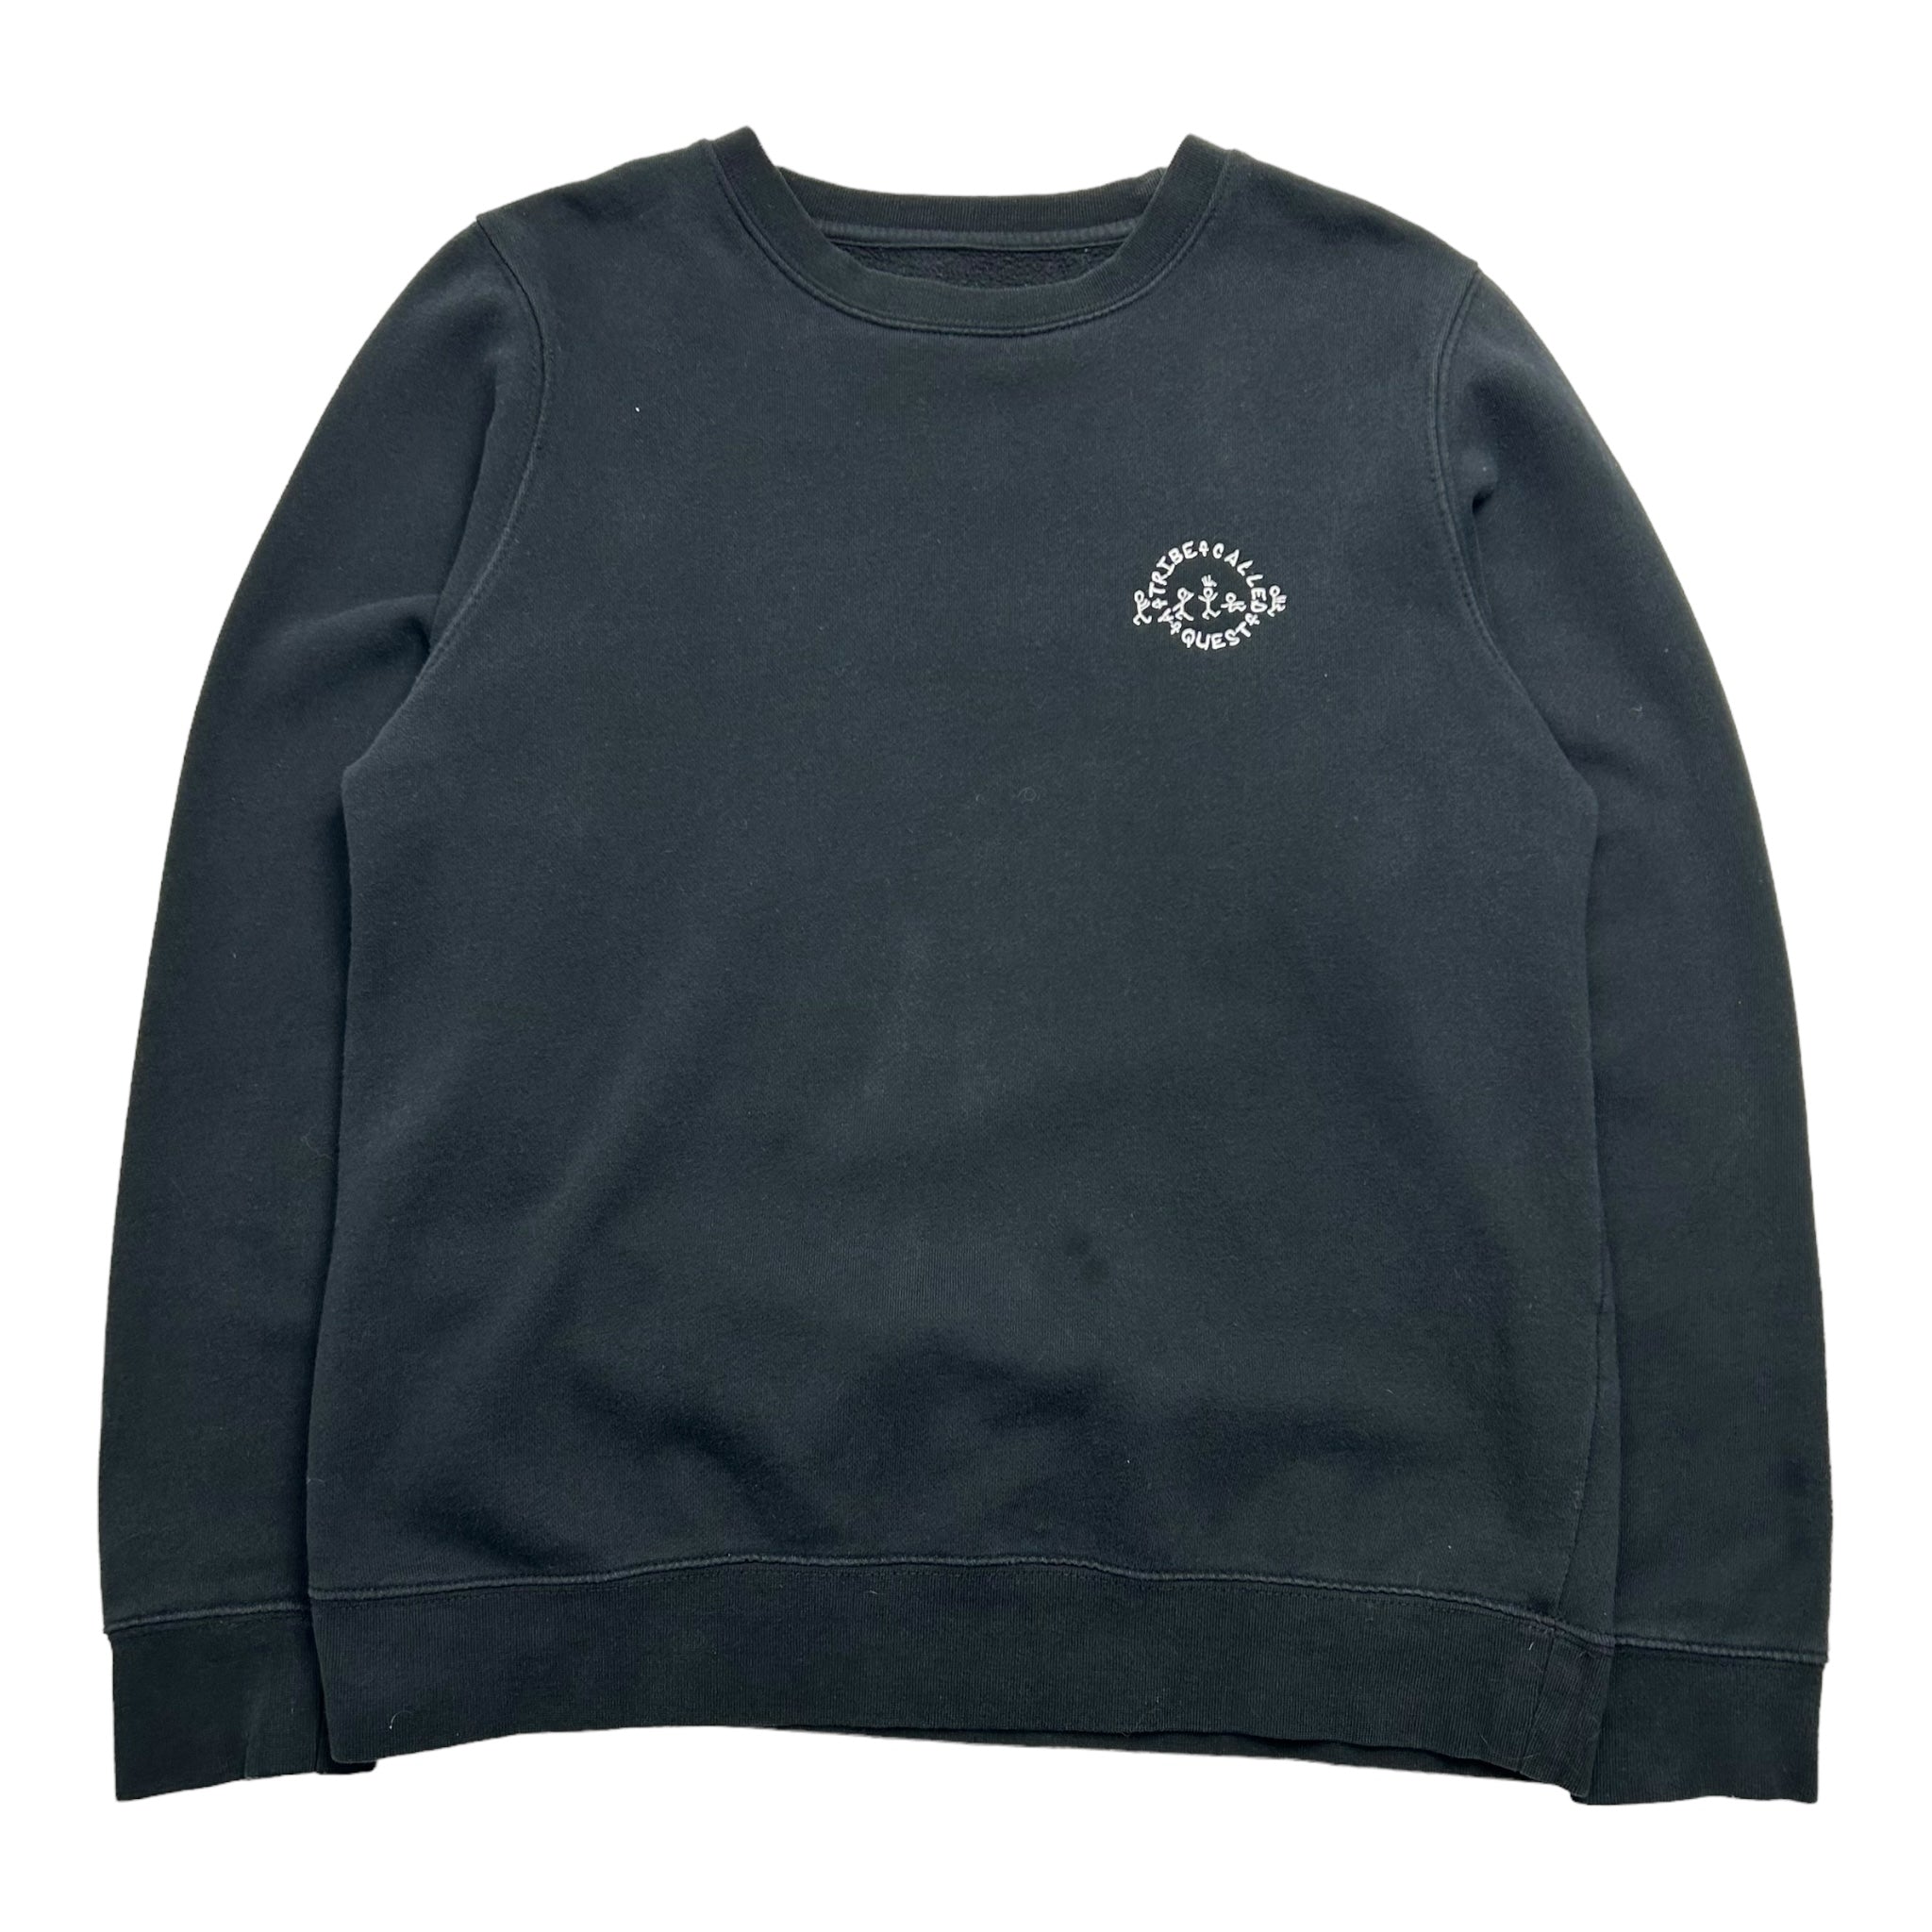 Stussy x A Tribe Called Quest Embroidered Crewneck